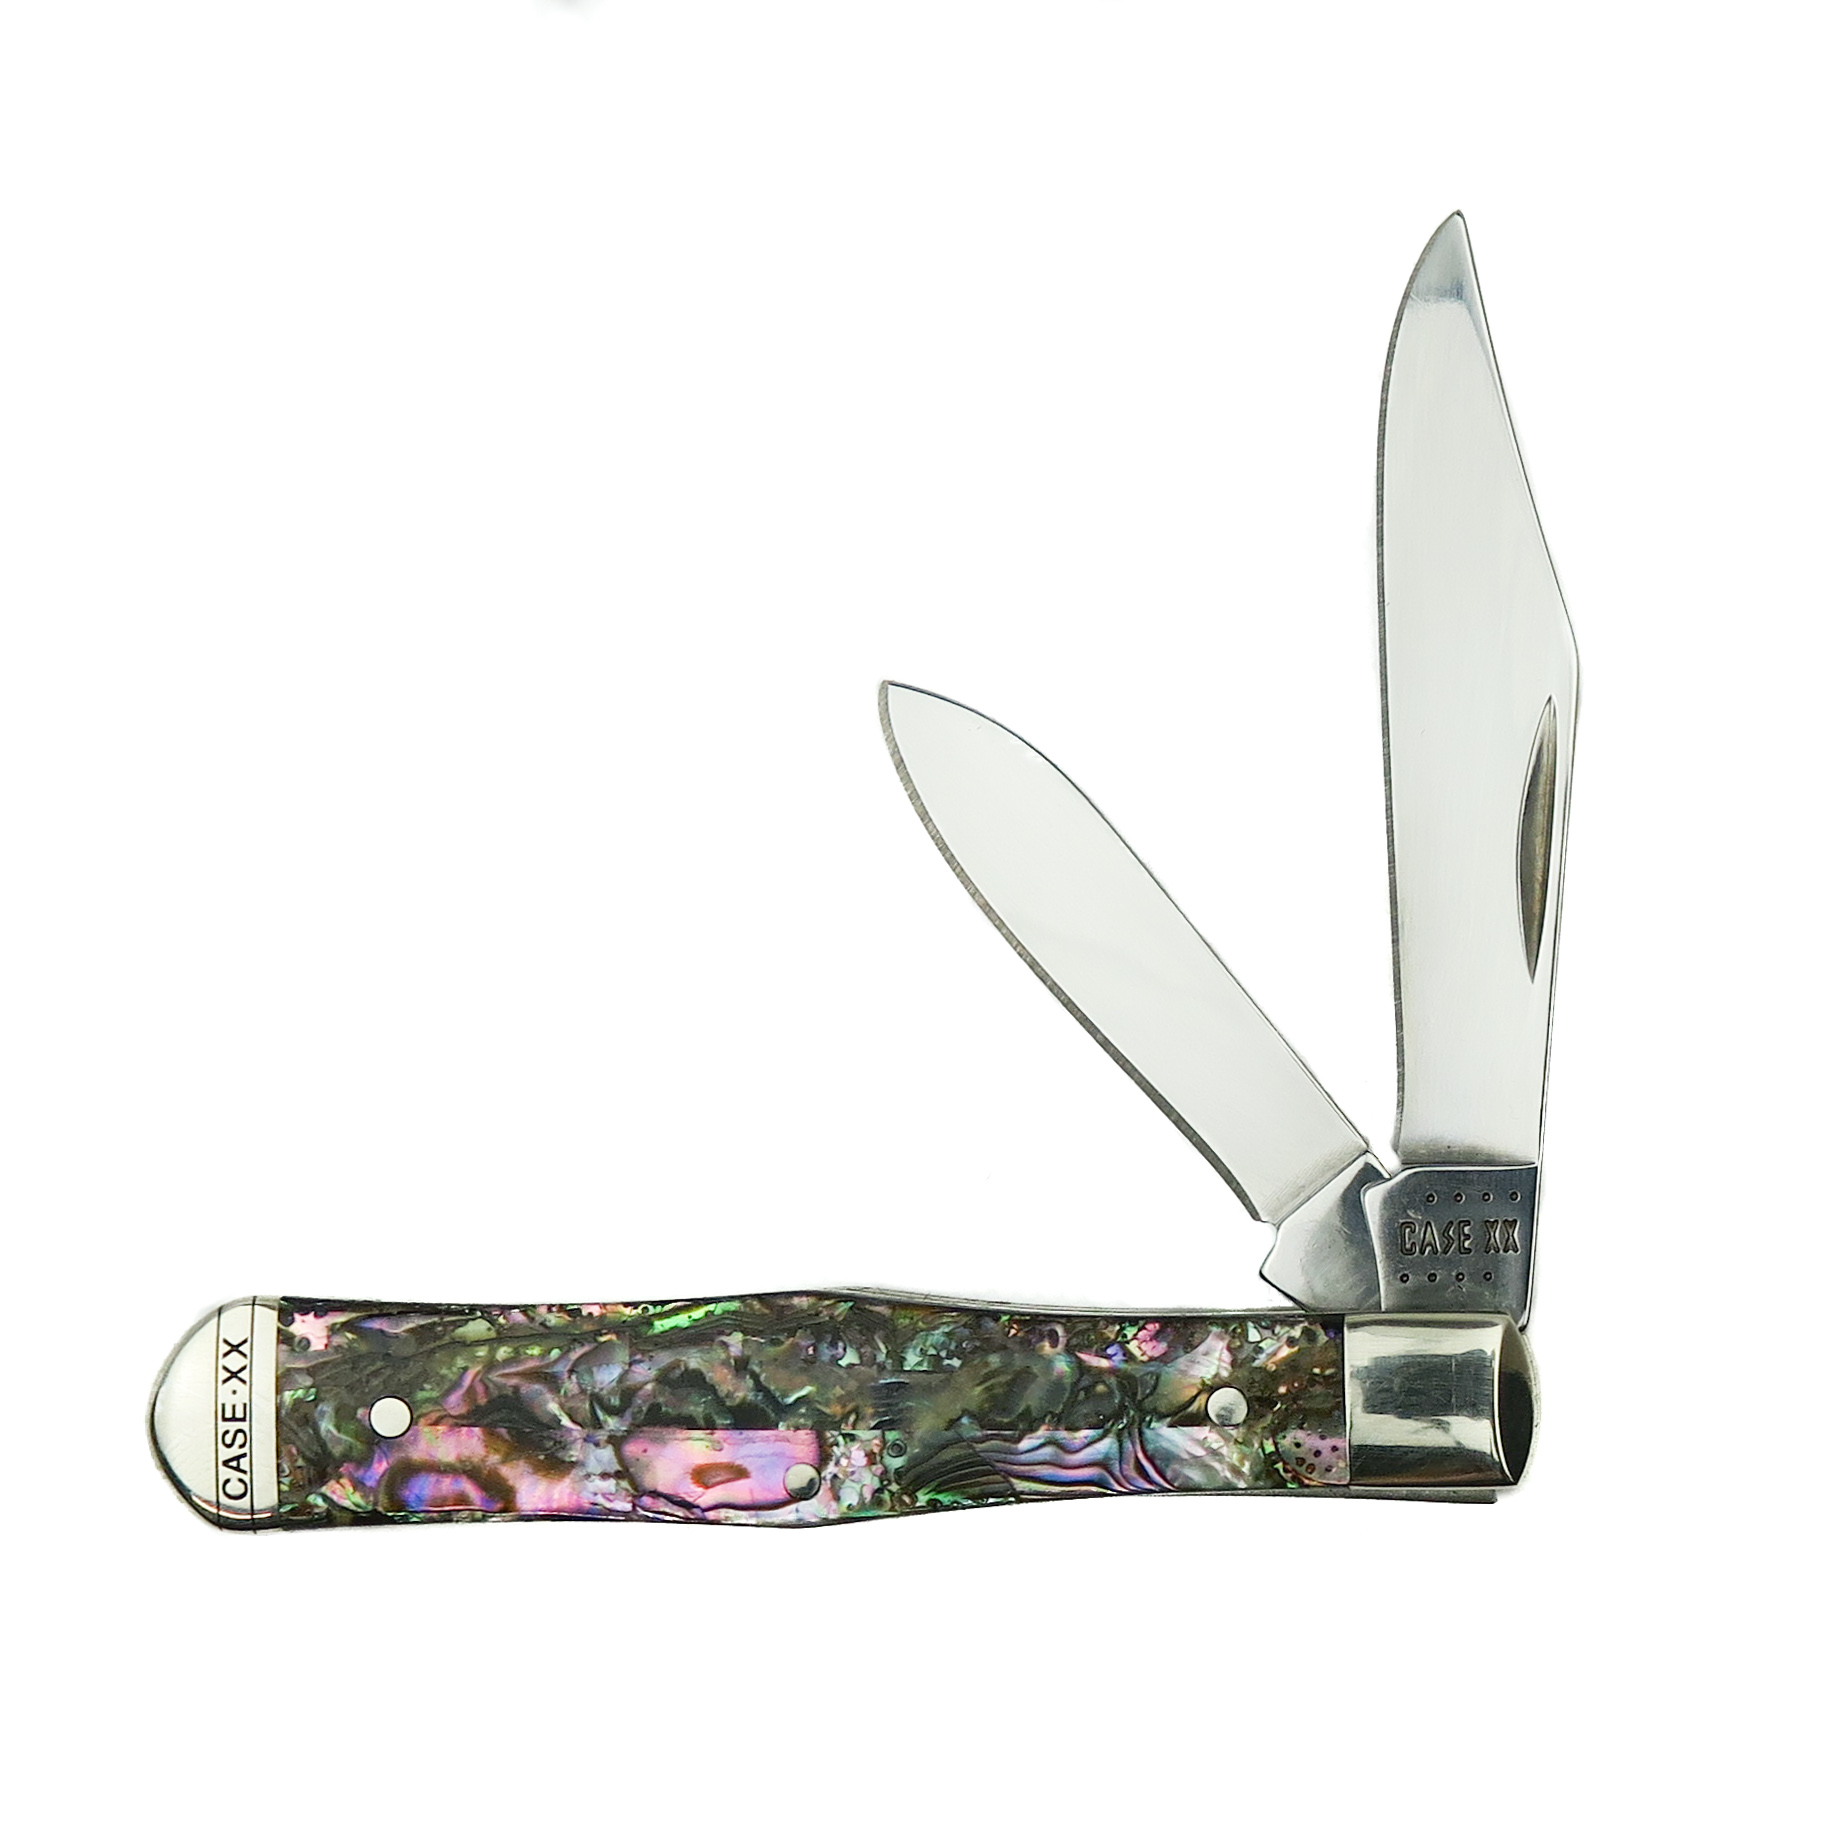 Case Smooth Abalone Small Swell Center Jack Knife